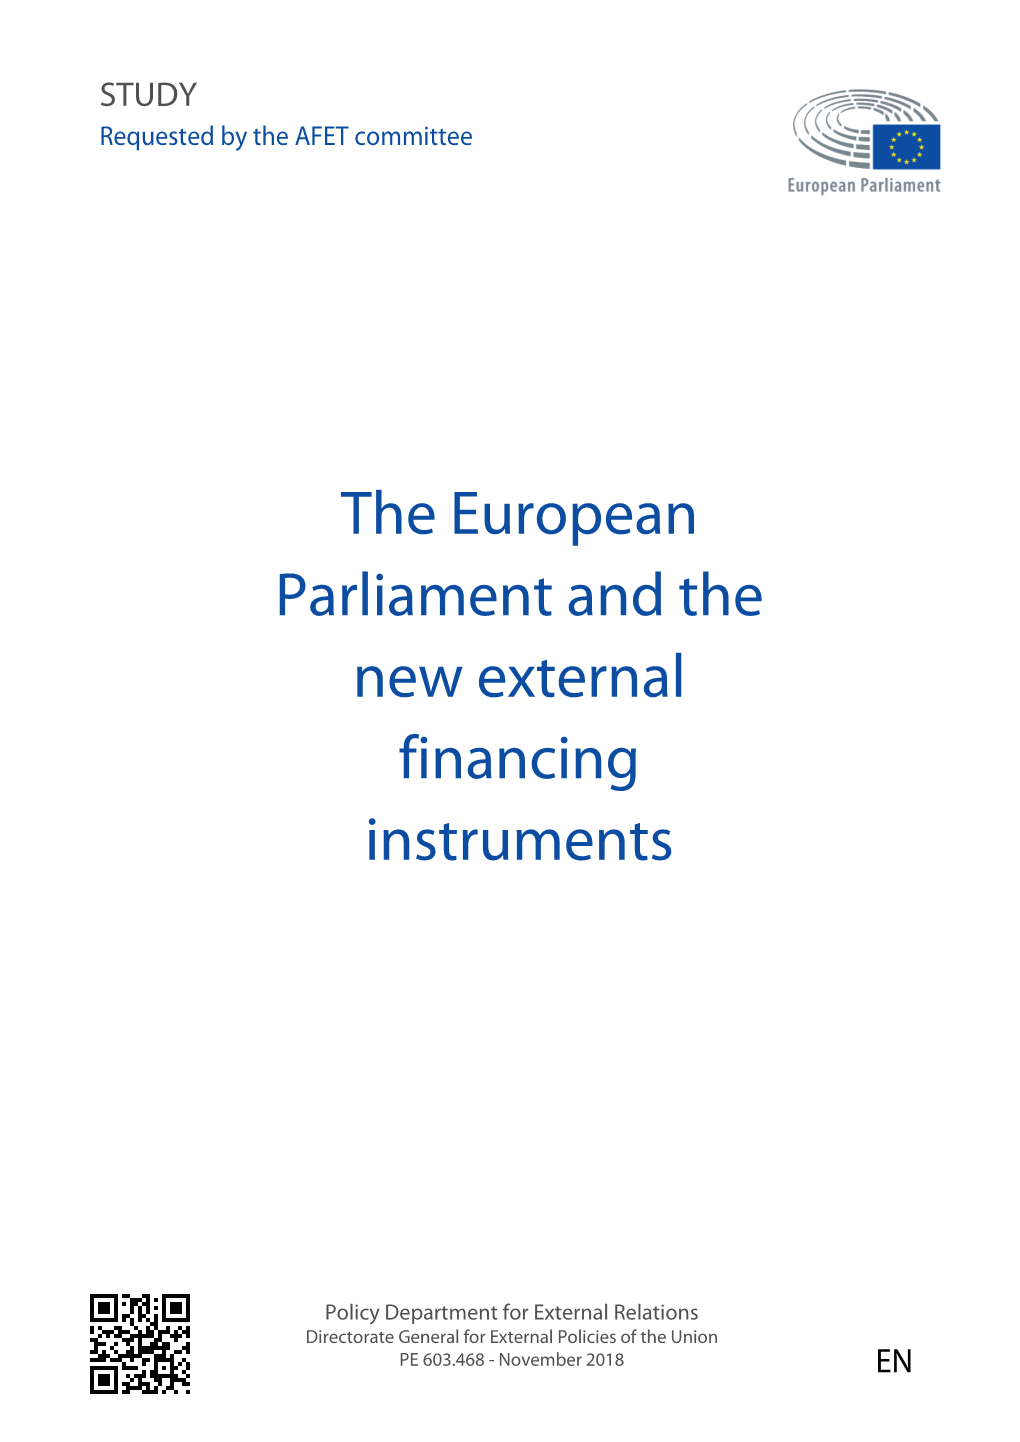 The European Parliament and the New External Financing Instruments